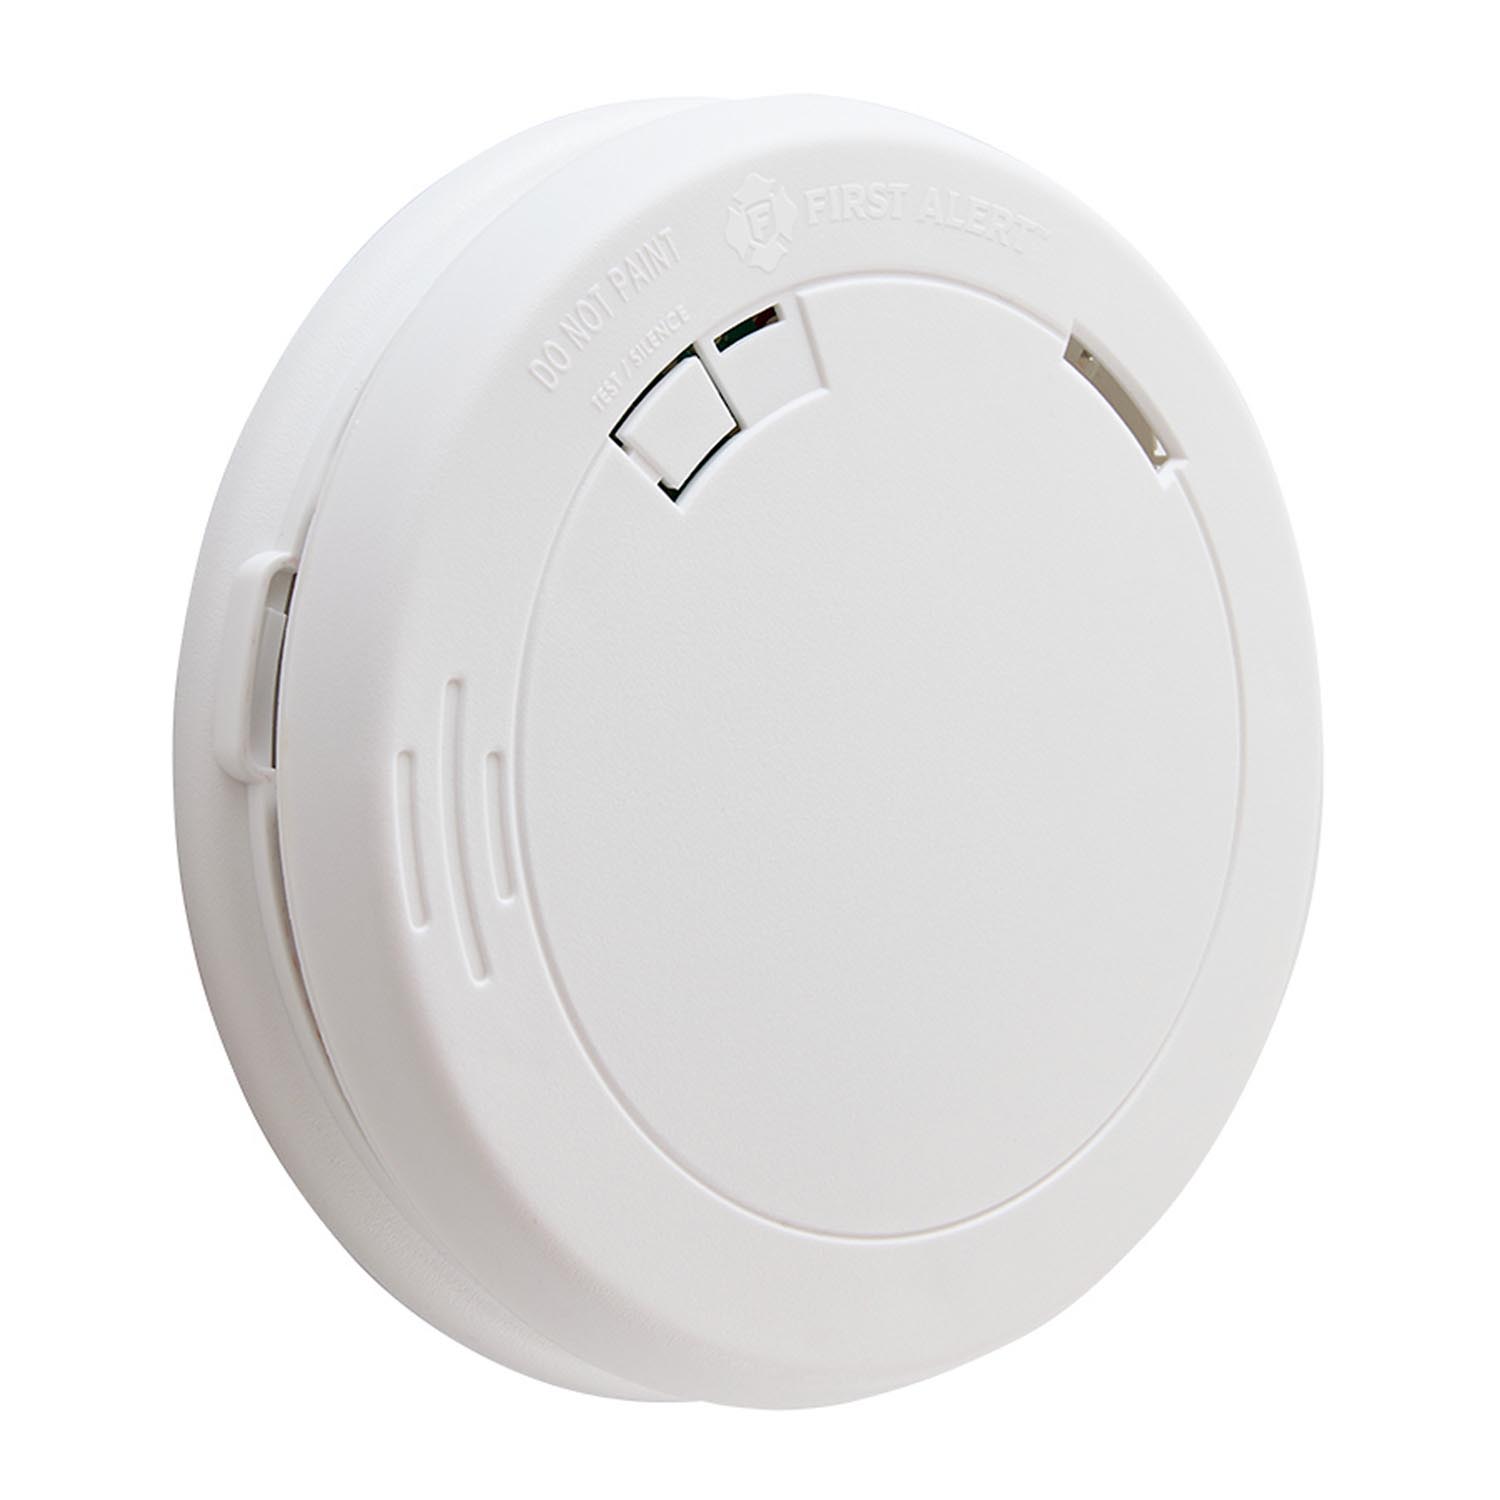 Smoke and carbon monoxide alarm Spring Cleaning